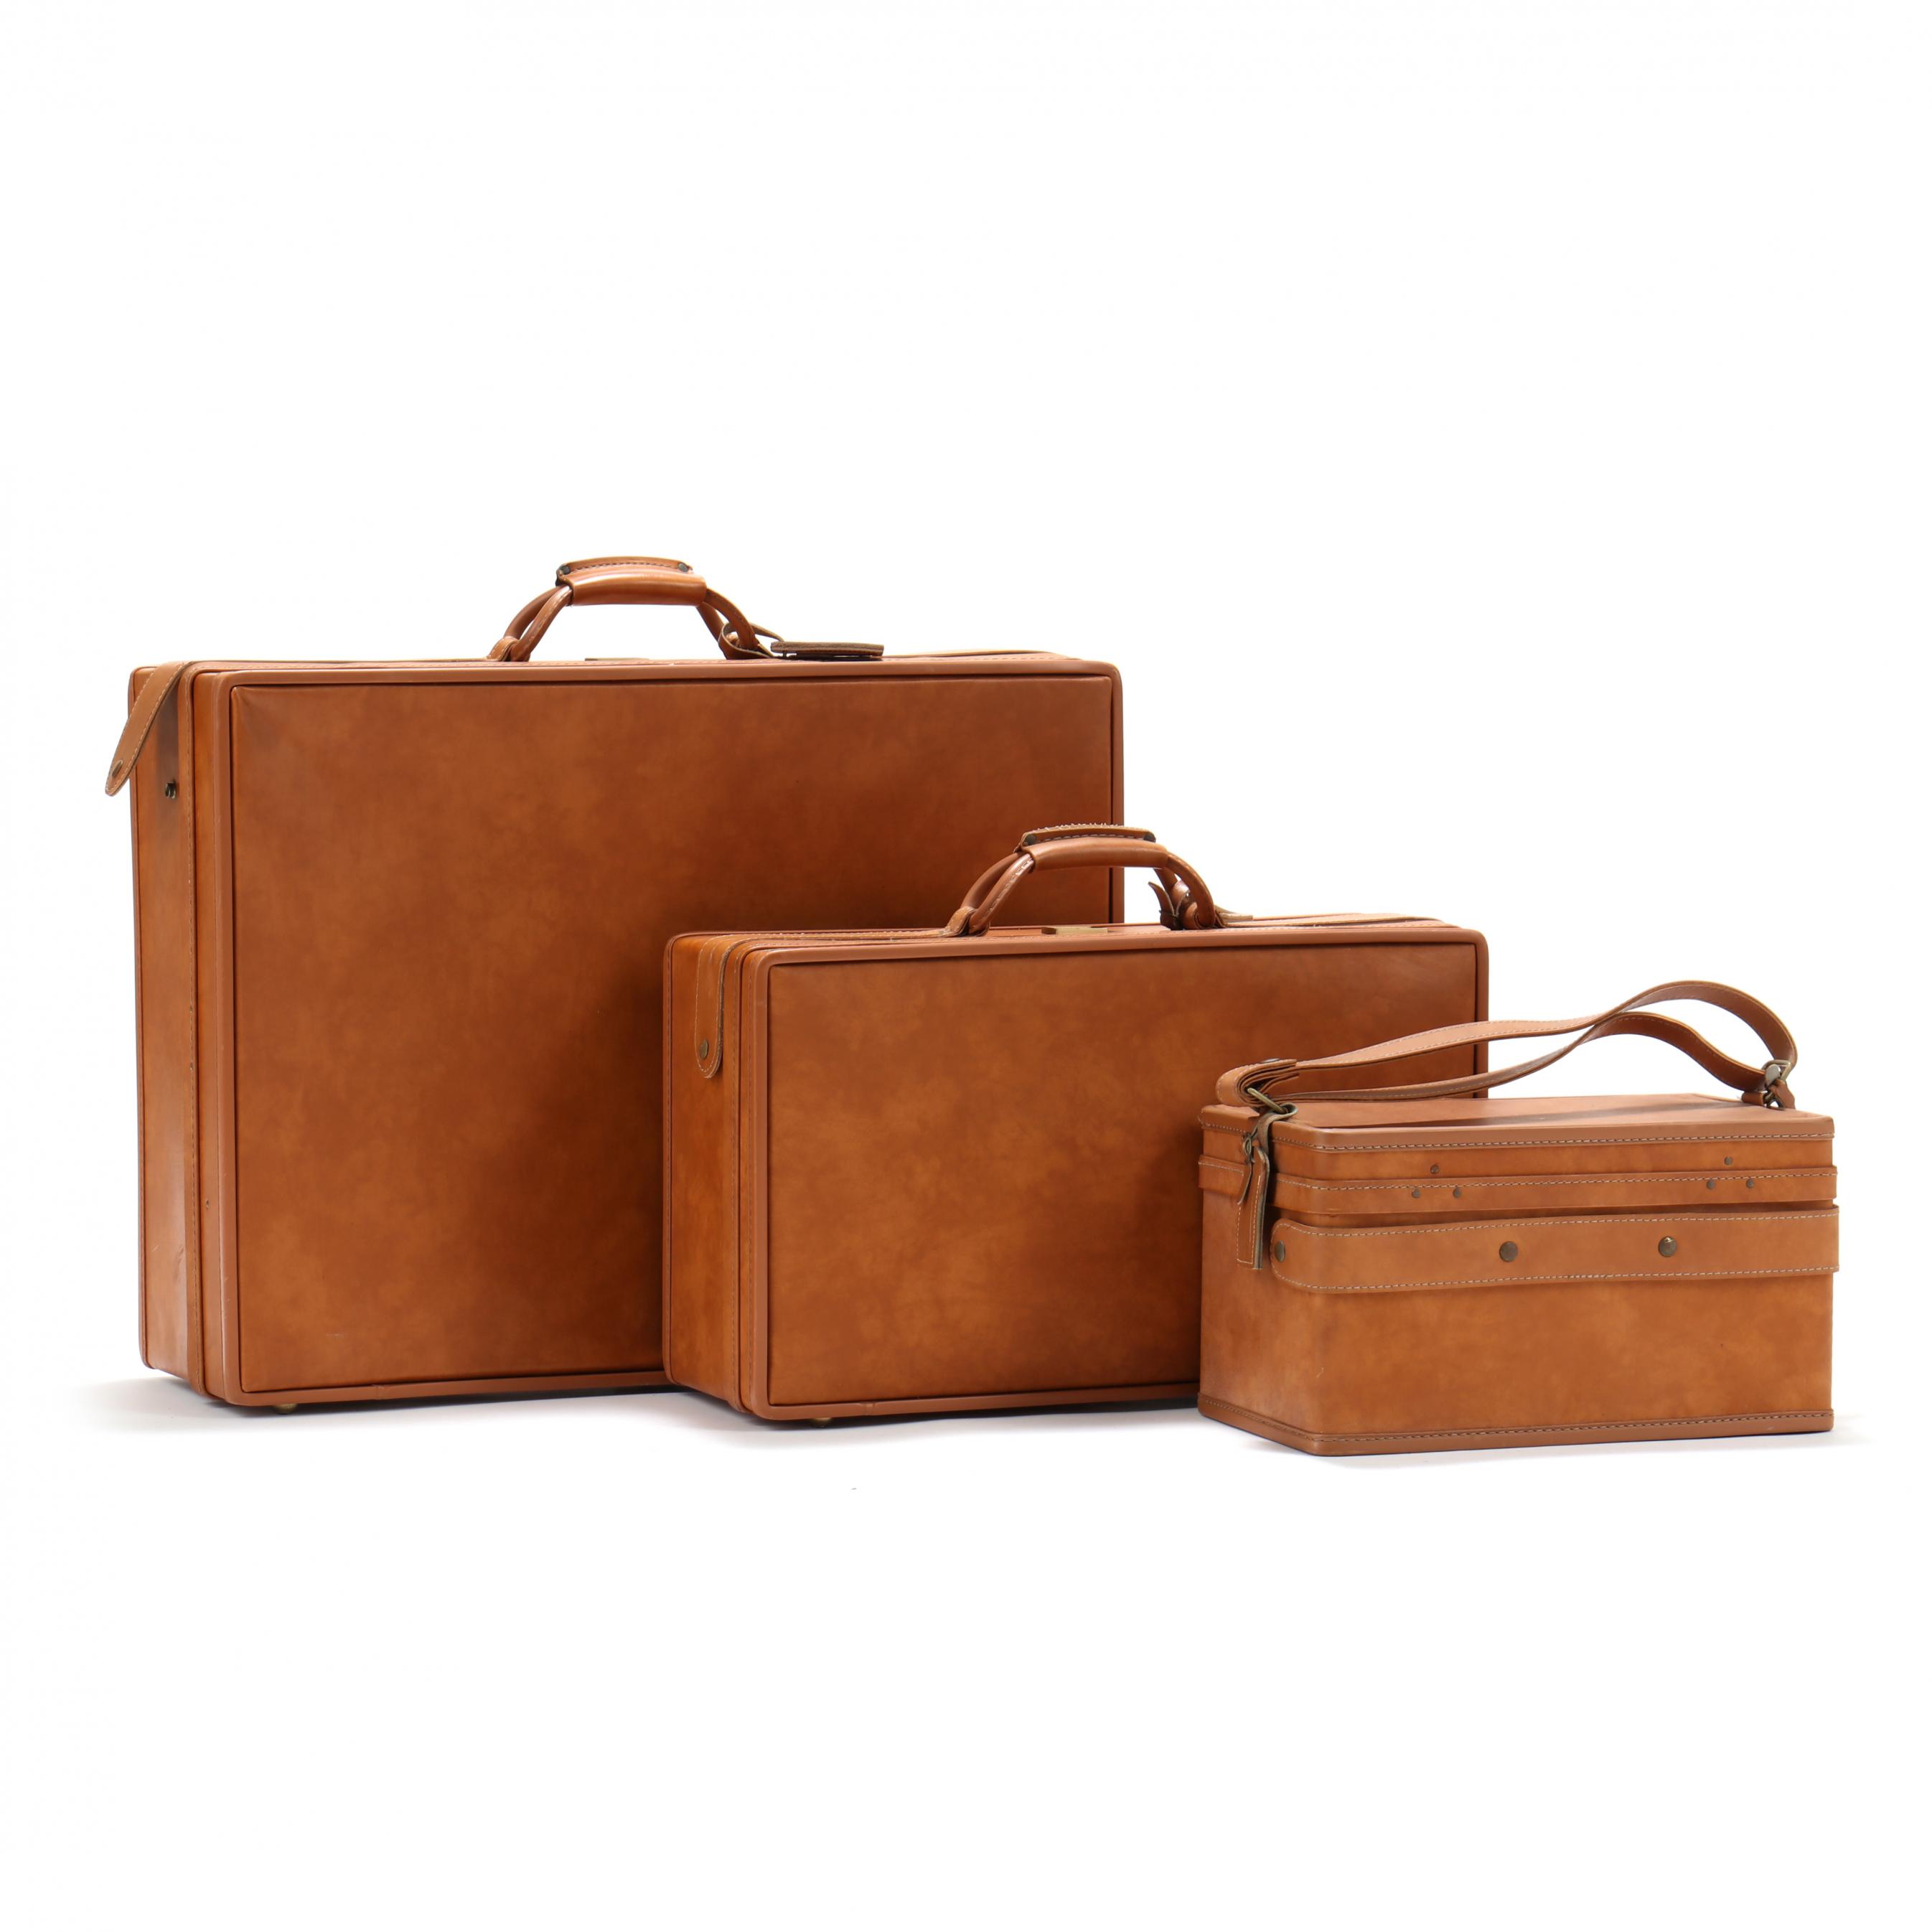 Pair of Hartmann Leather Suitcase's